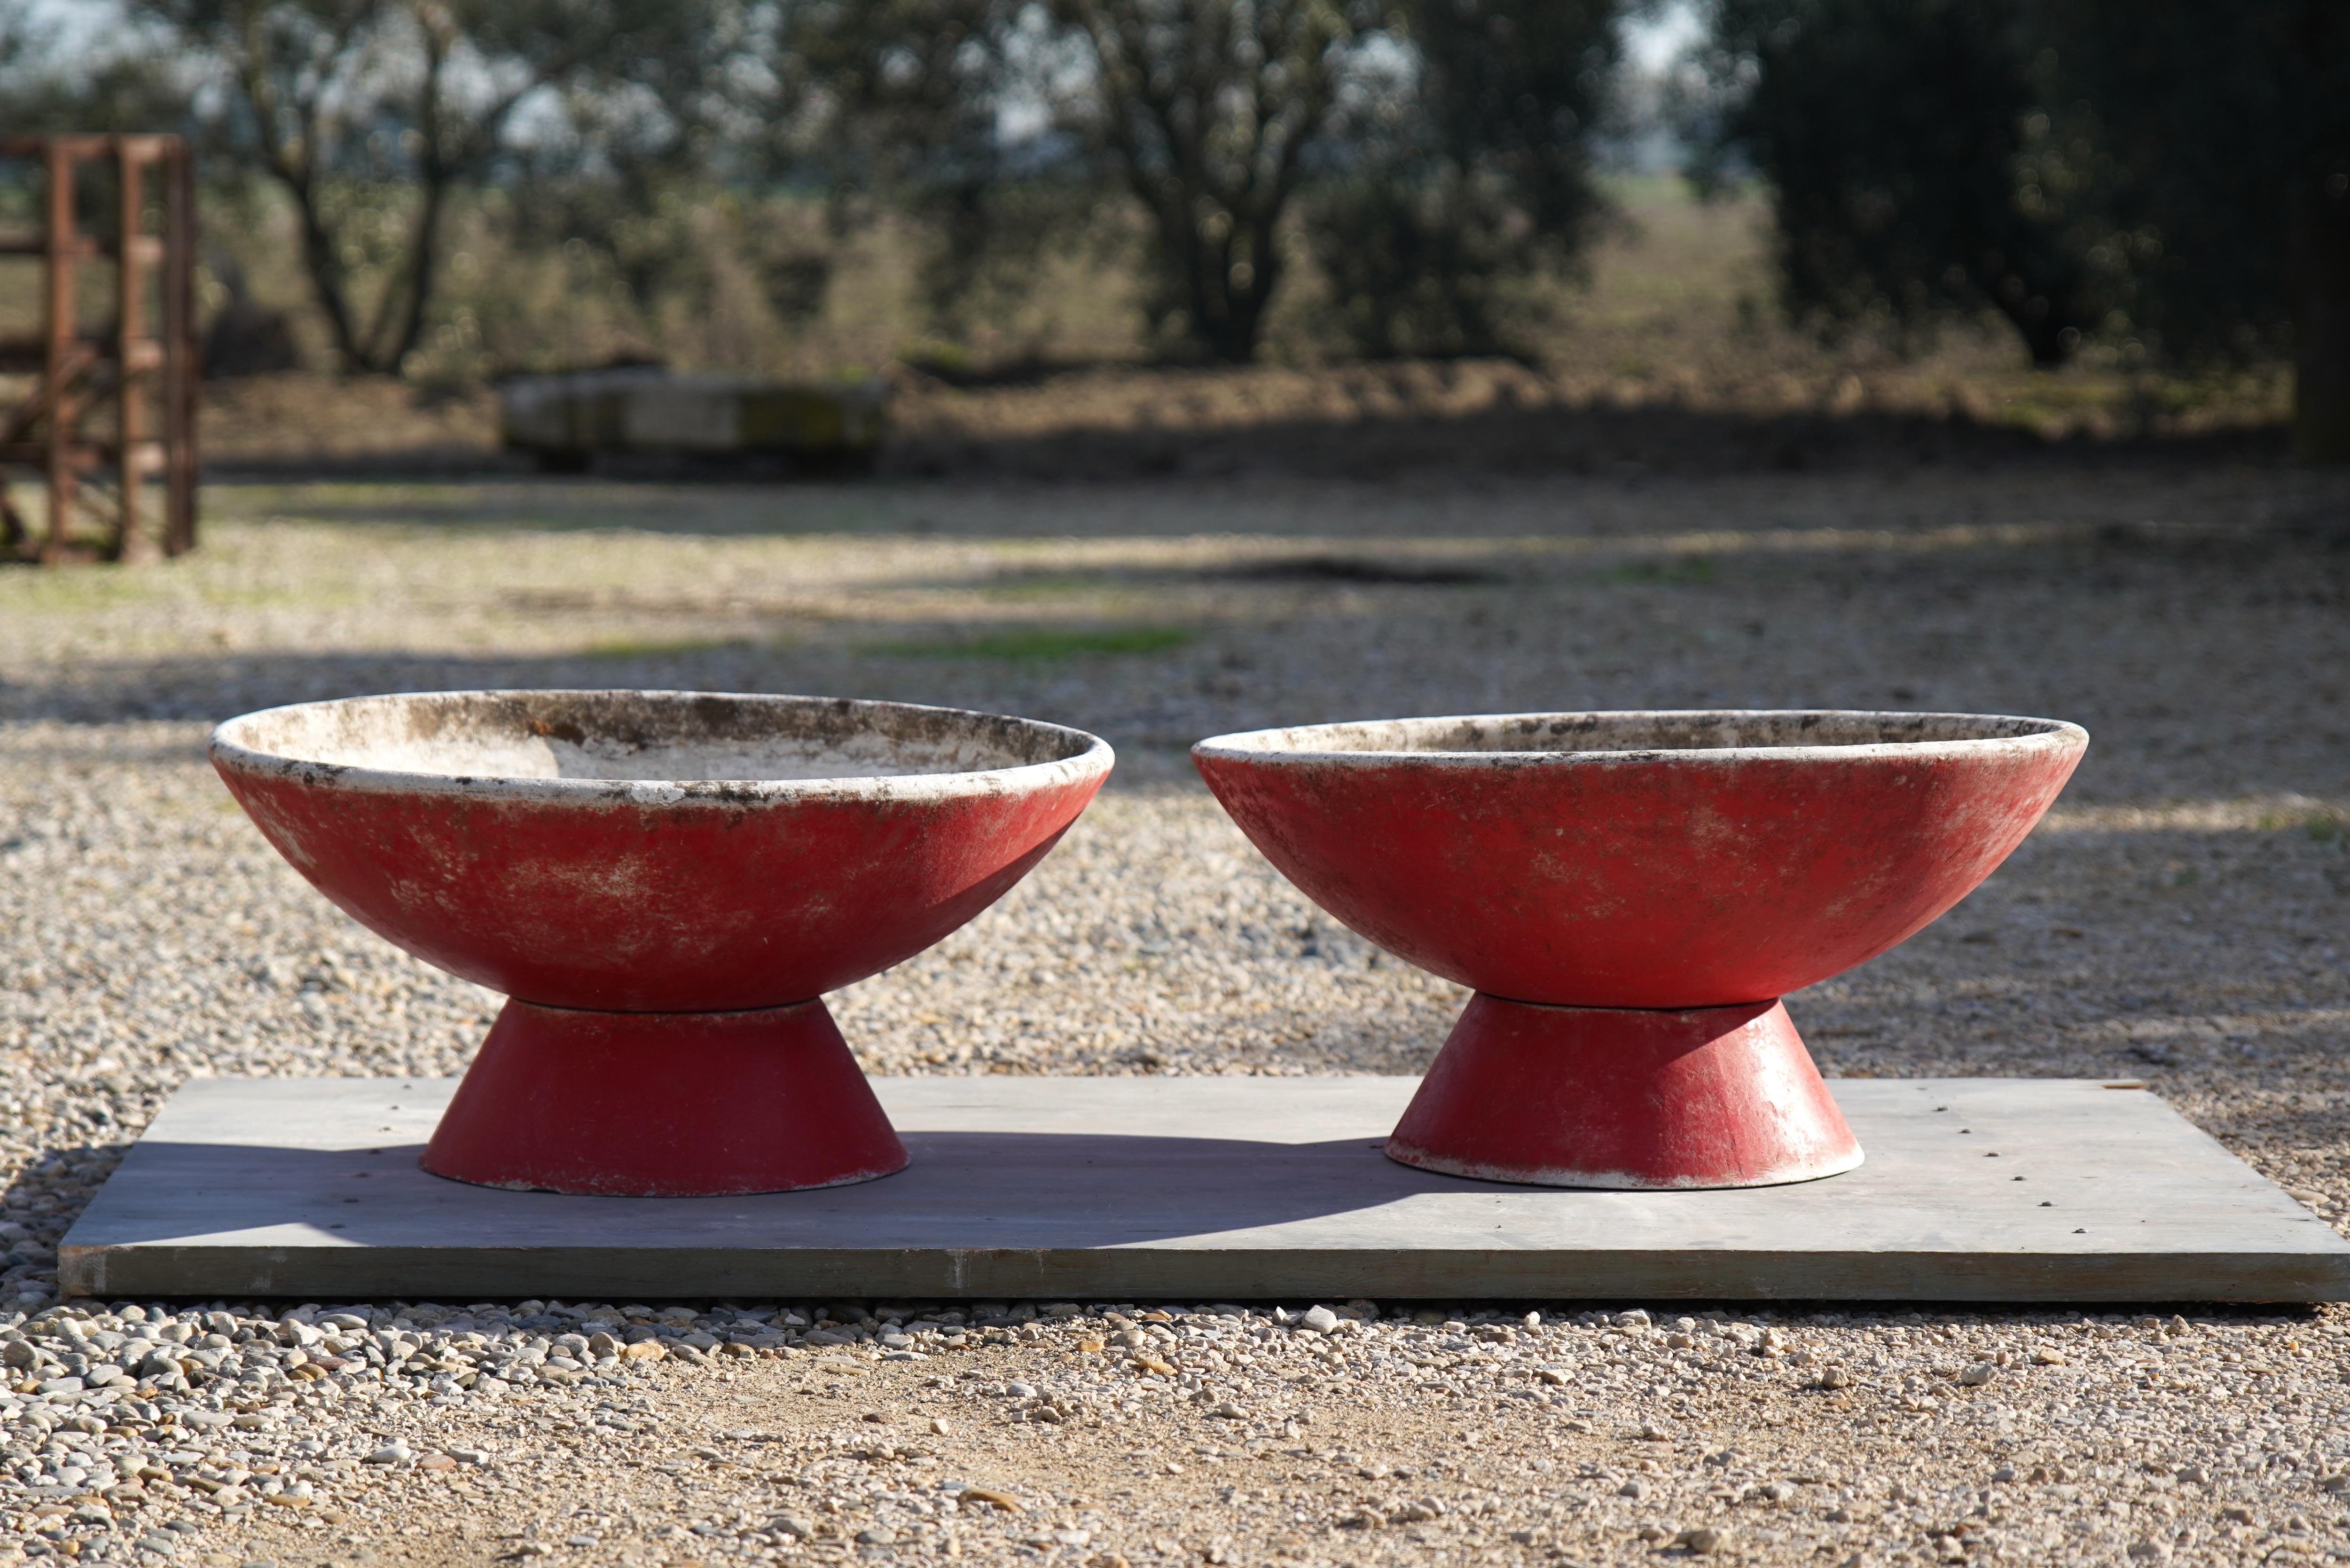 Wonderful cement bowl planters designed by Willy Guhl for Eternit in Switzerland circa 1960s.

The bowl can be angled a multitude of ways due to it being a separate entity from the base allowing plants to trail if wished. The base can also be